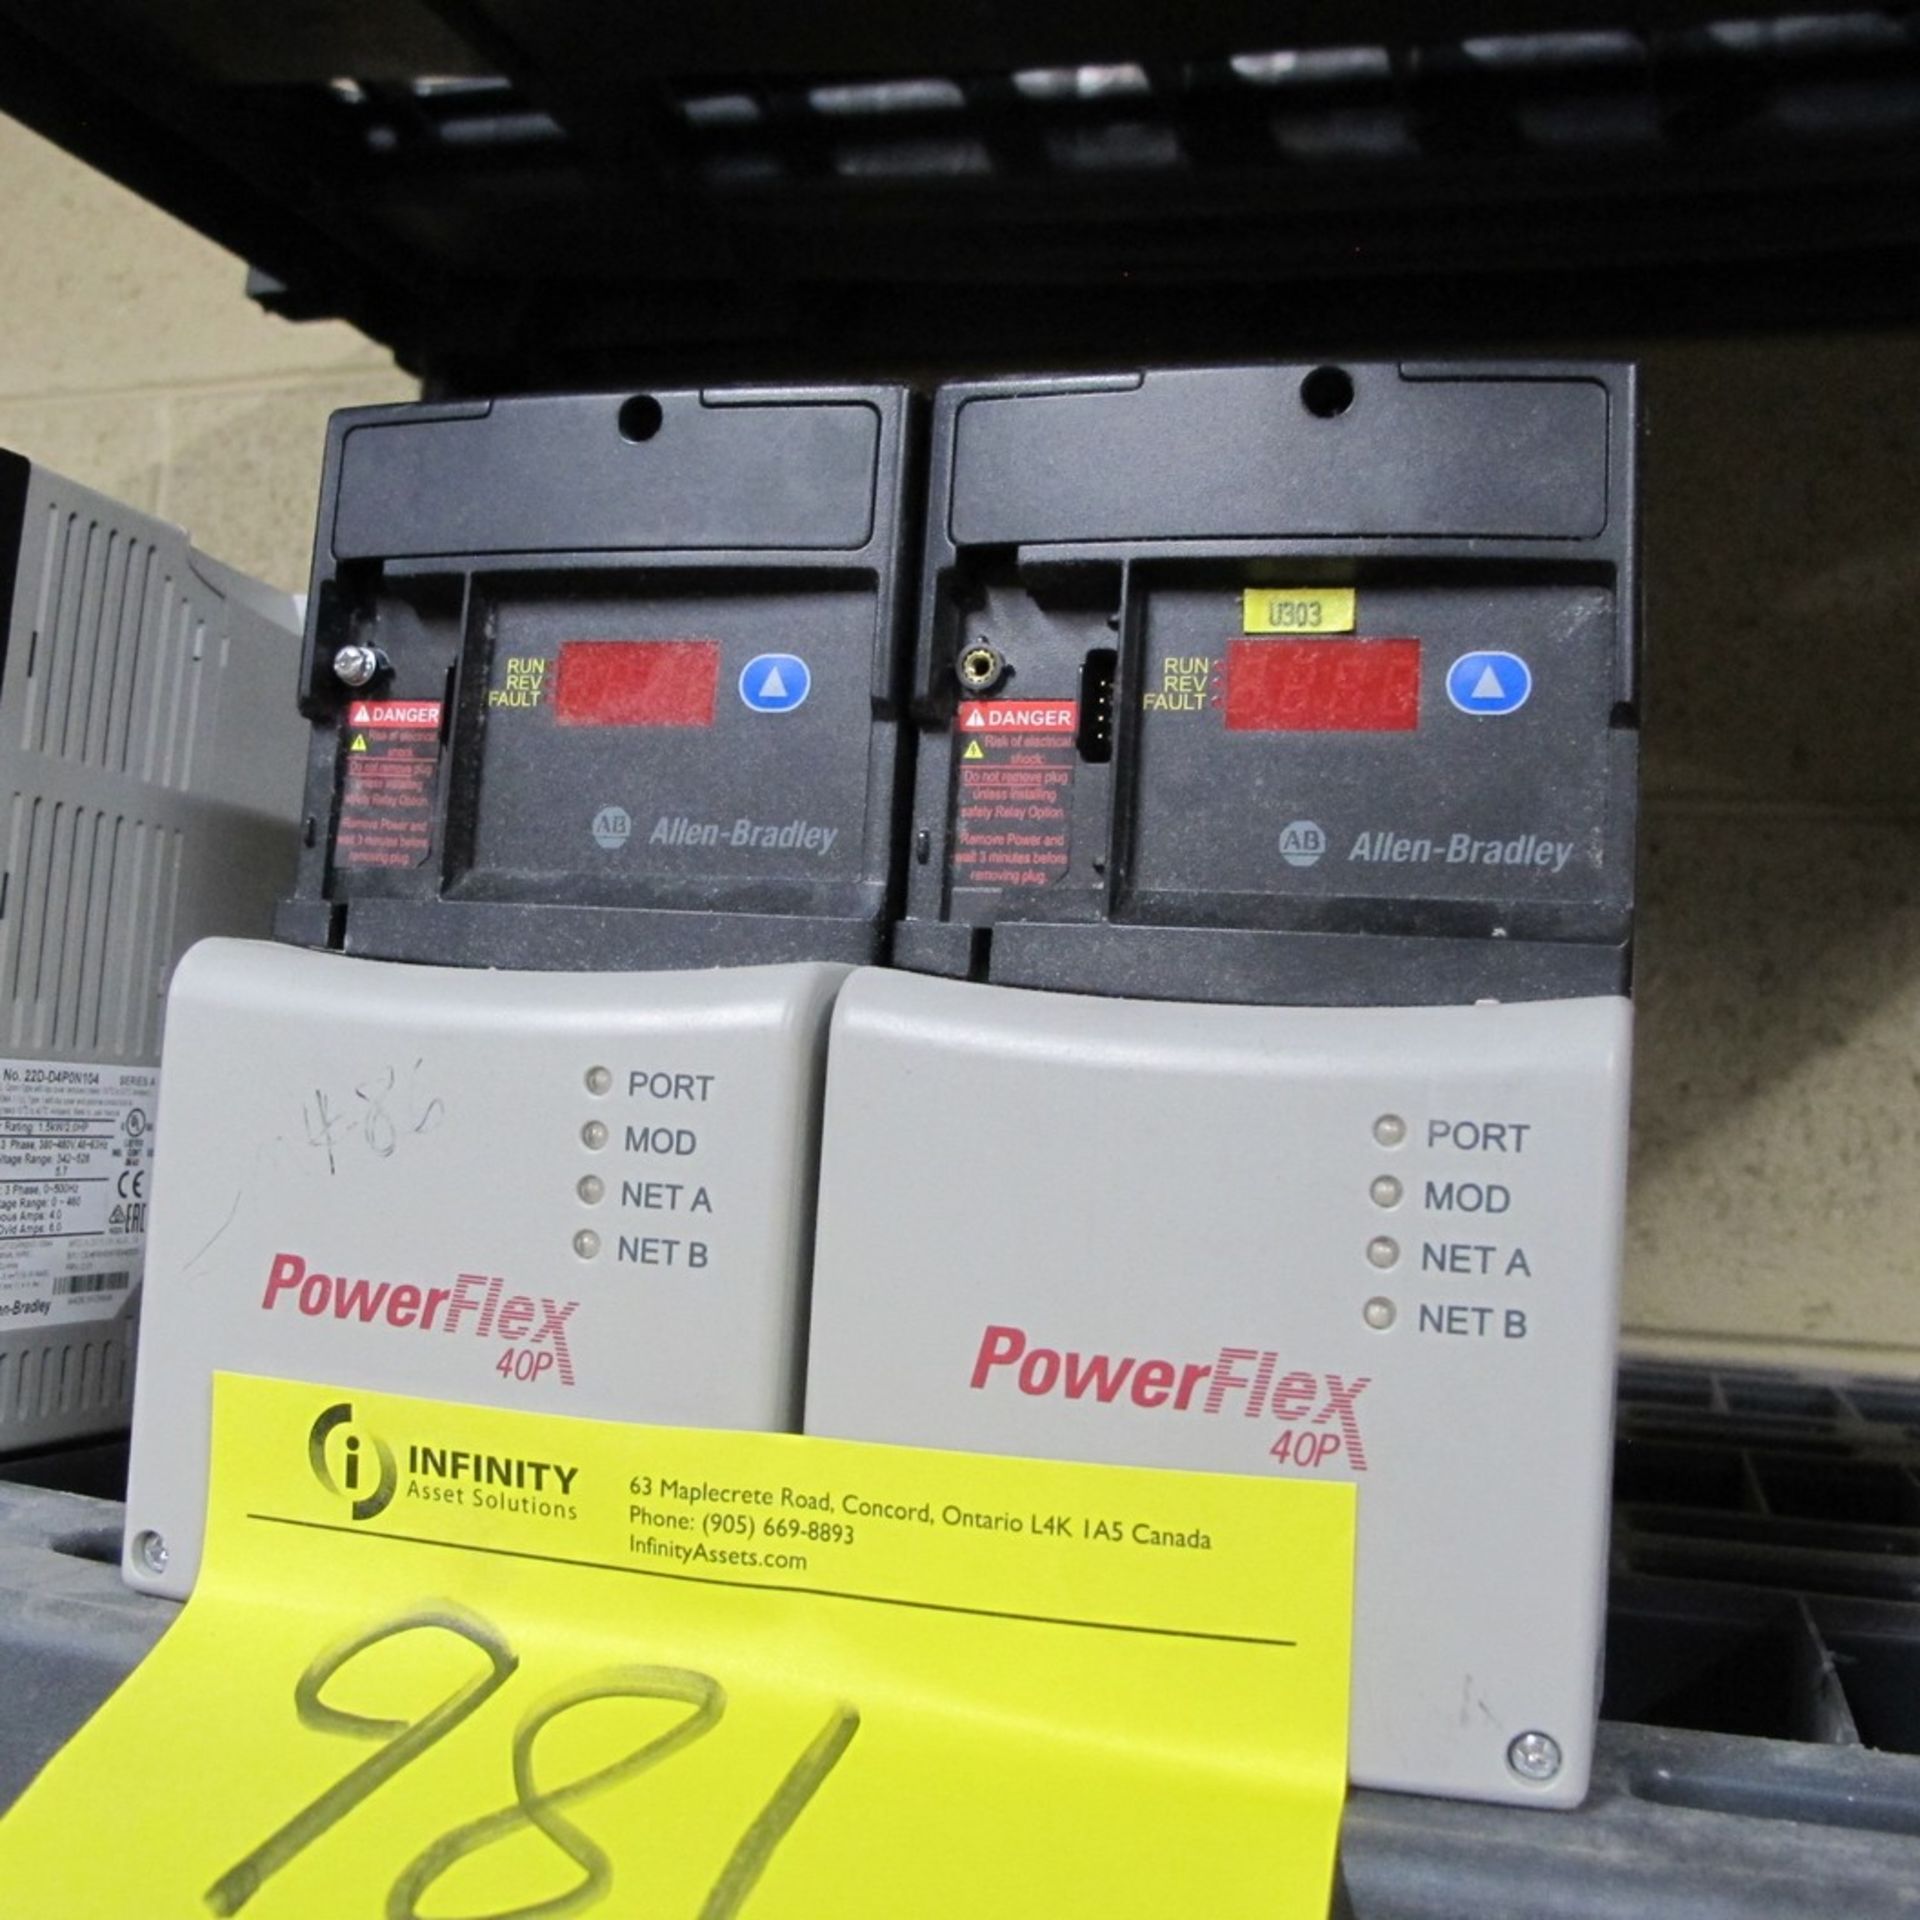 LOT OF (2) POWERFLEX 40P MODULES 22D-D4P0N104 (NORTH ELECTRICAL ROOM)